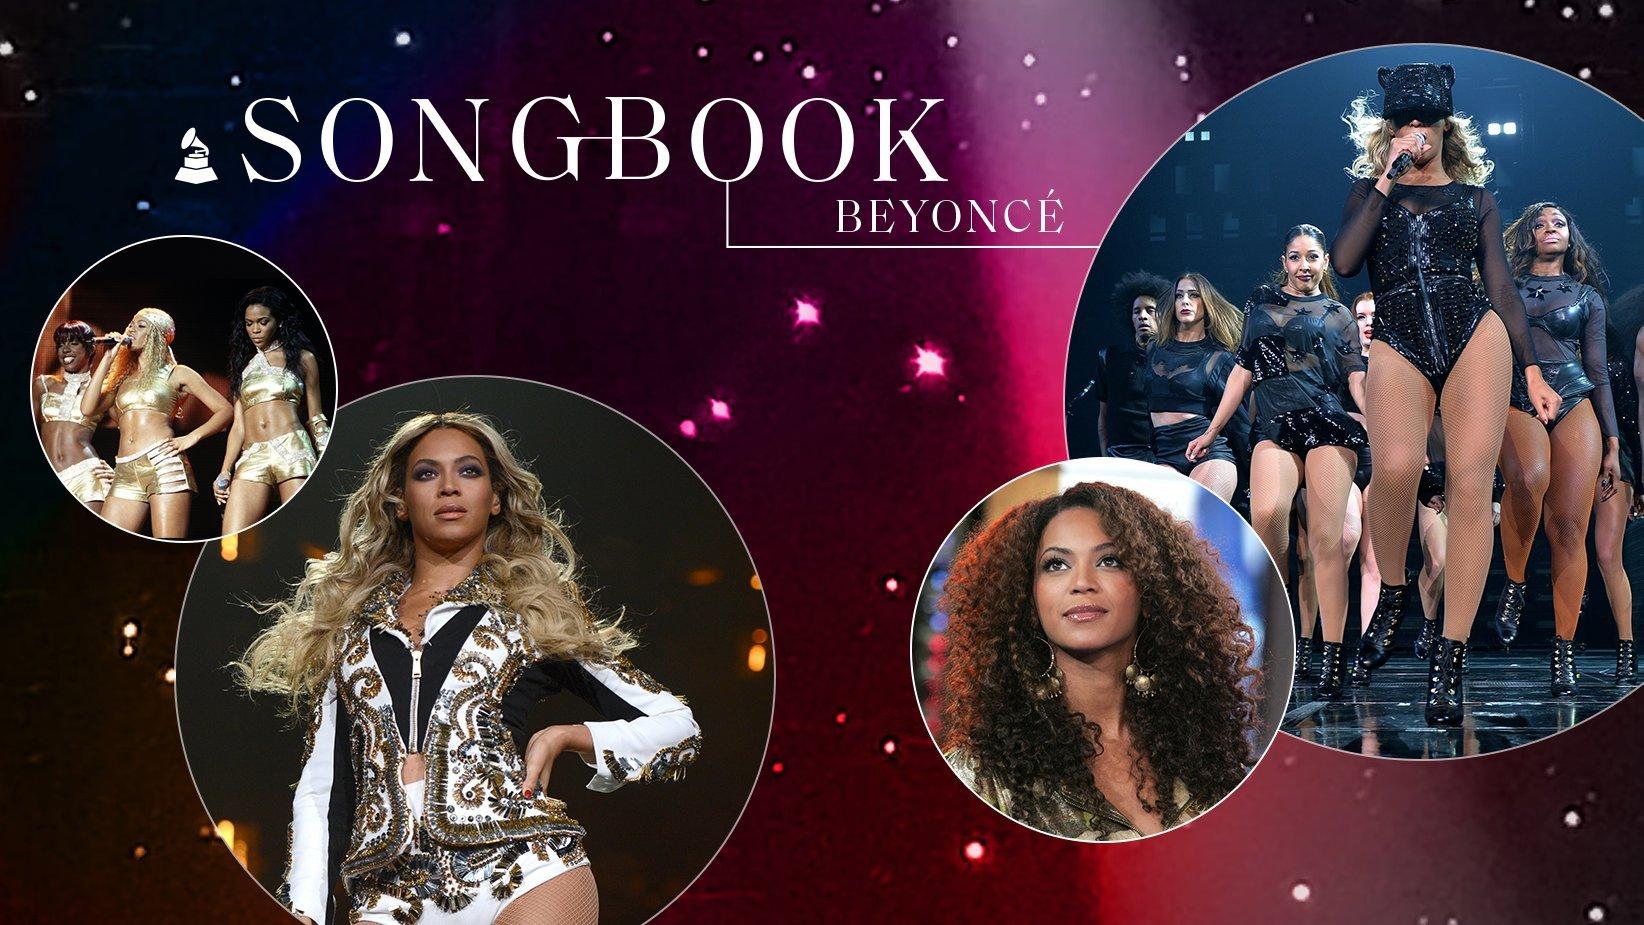 Songbook: The Complete Guide To The Albums, Visuals & Performances